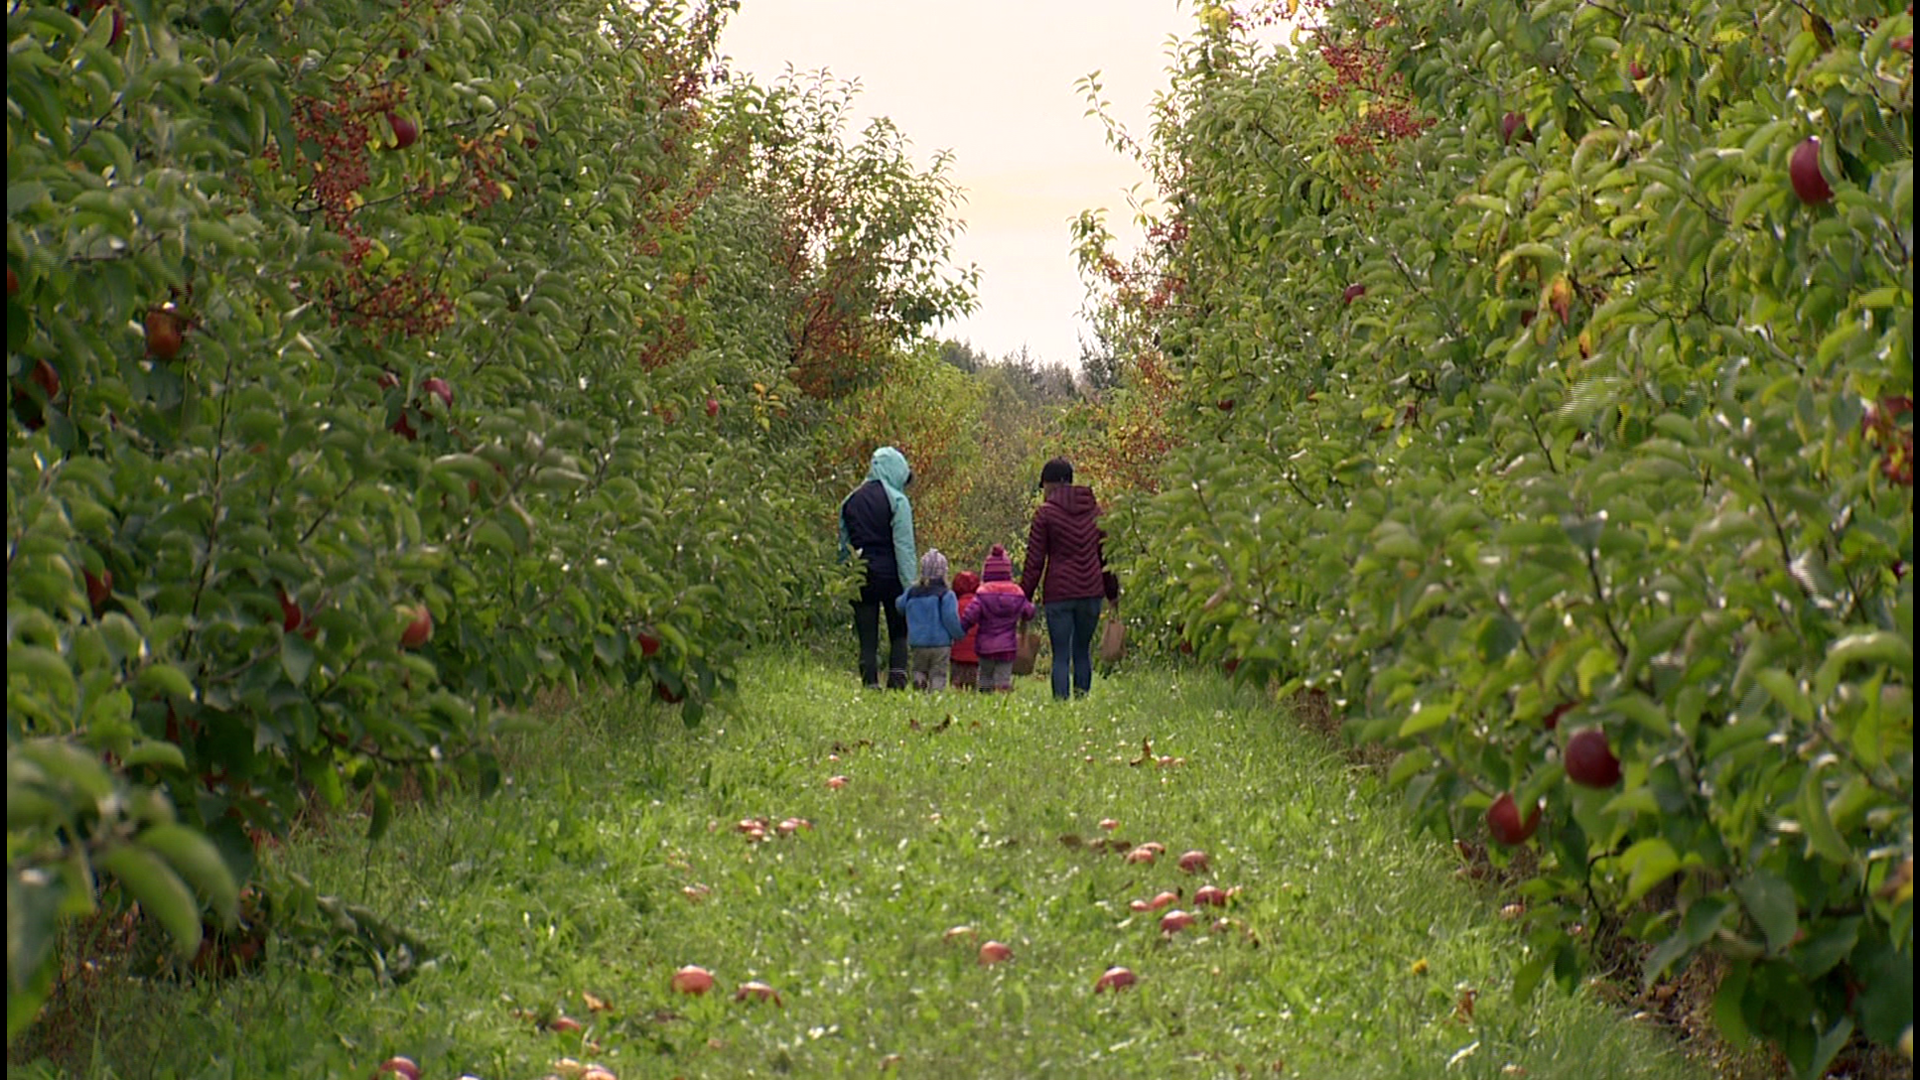 Pick your own of Washington's fruit at Bellewood Farms